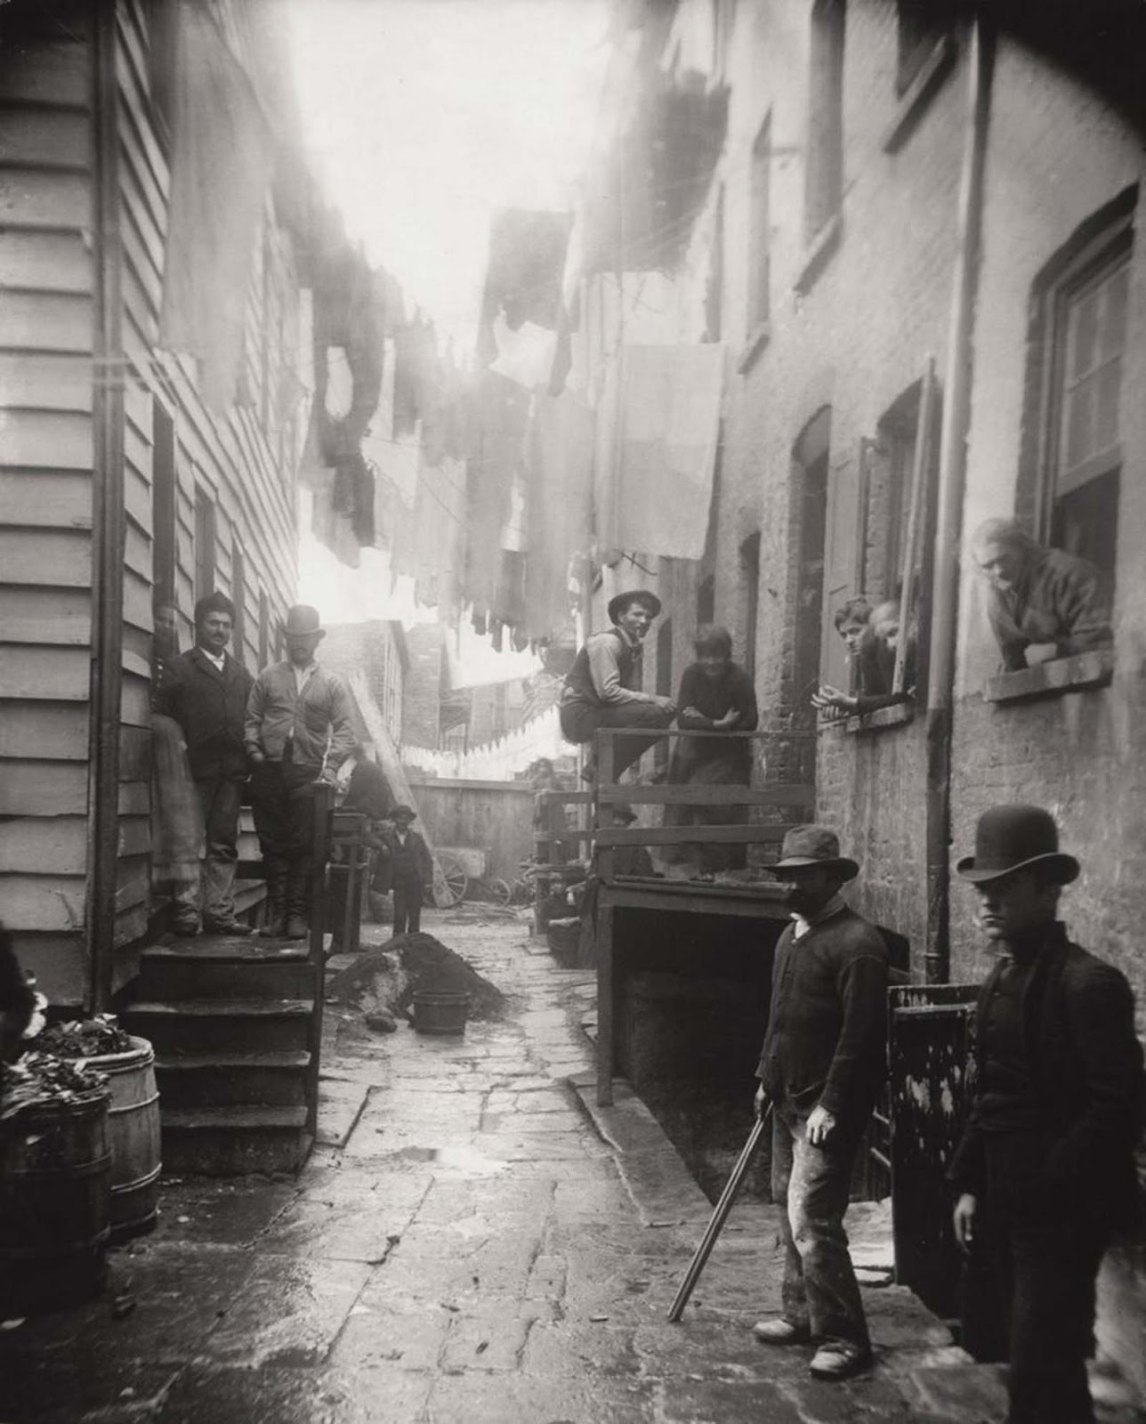 Bandit's Roost, 59½ Mulberry Street, Jacob Riis, 1888